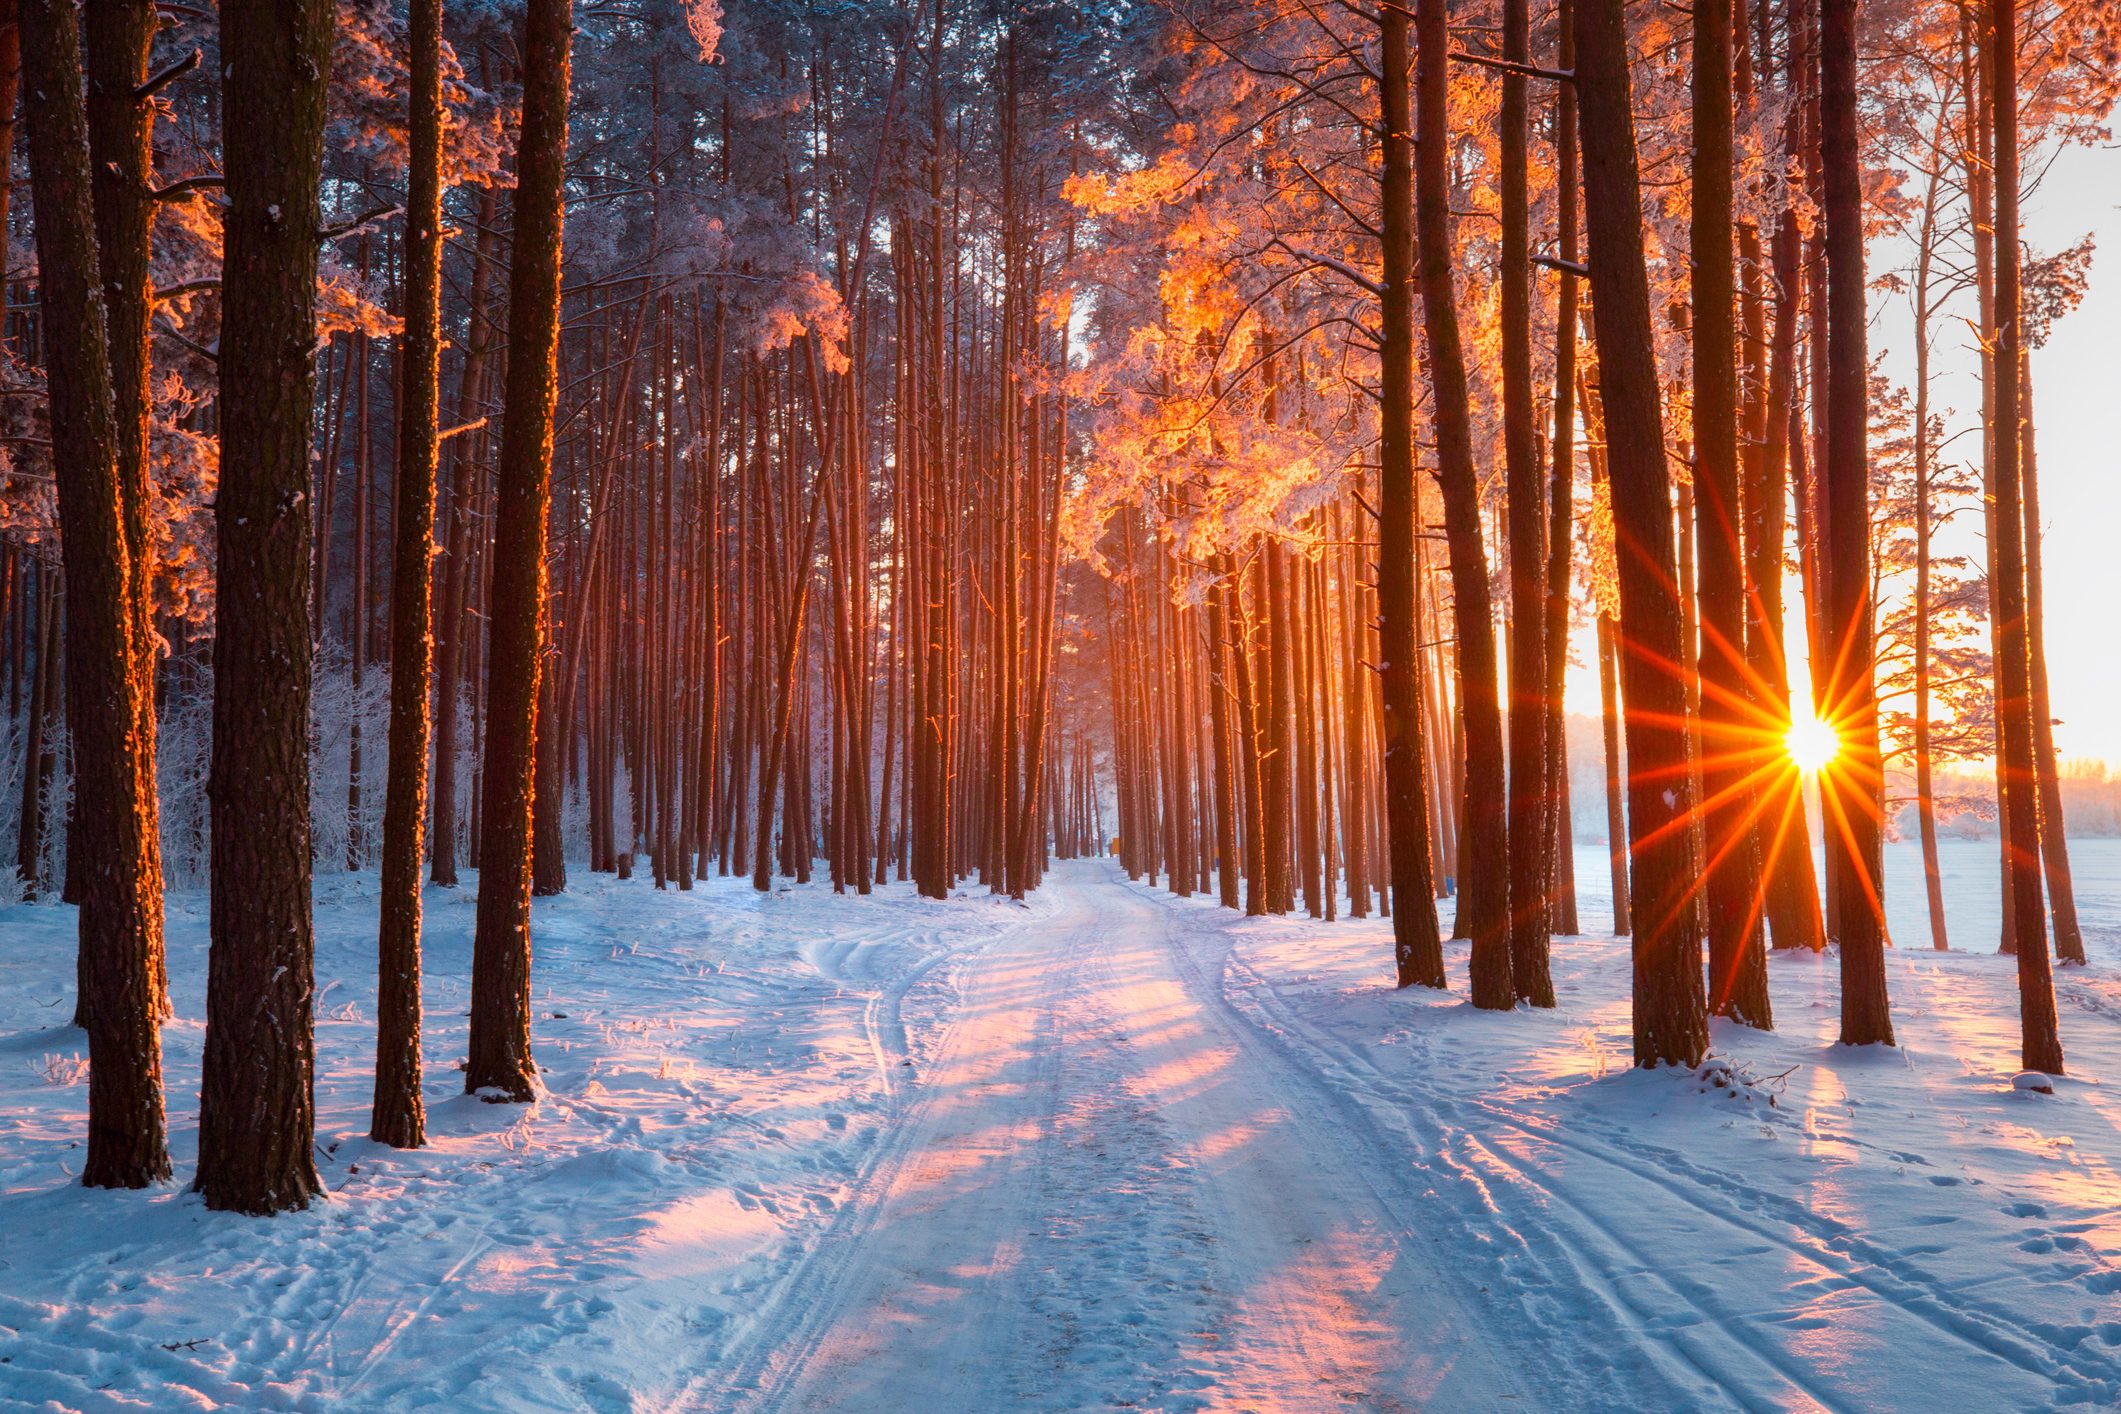 Snowy path in winter forest. Evening sun shines through trees.